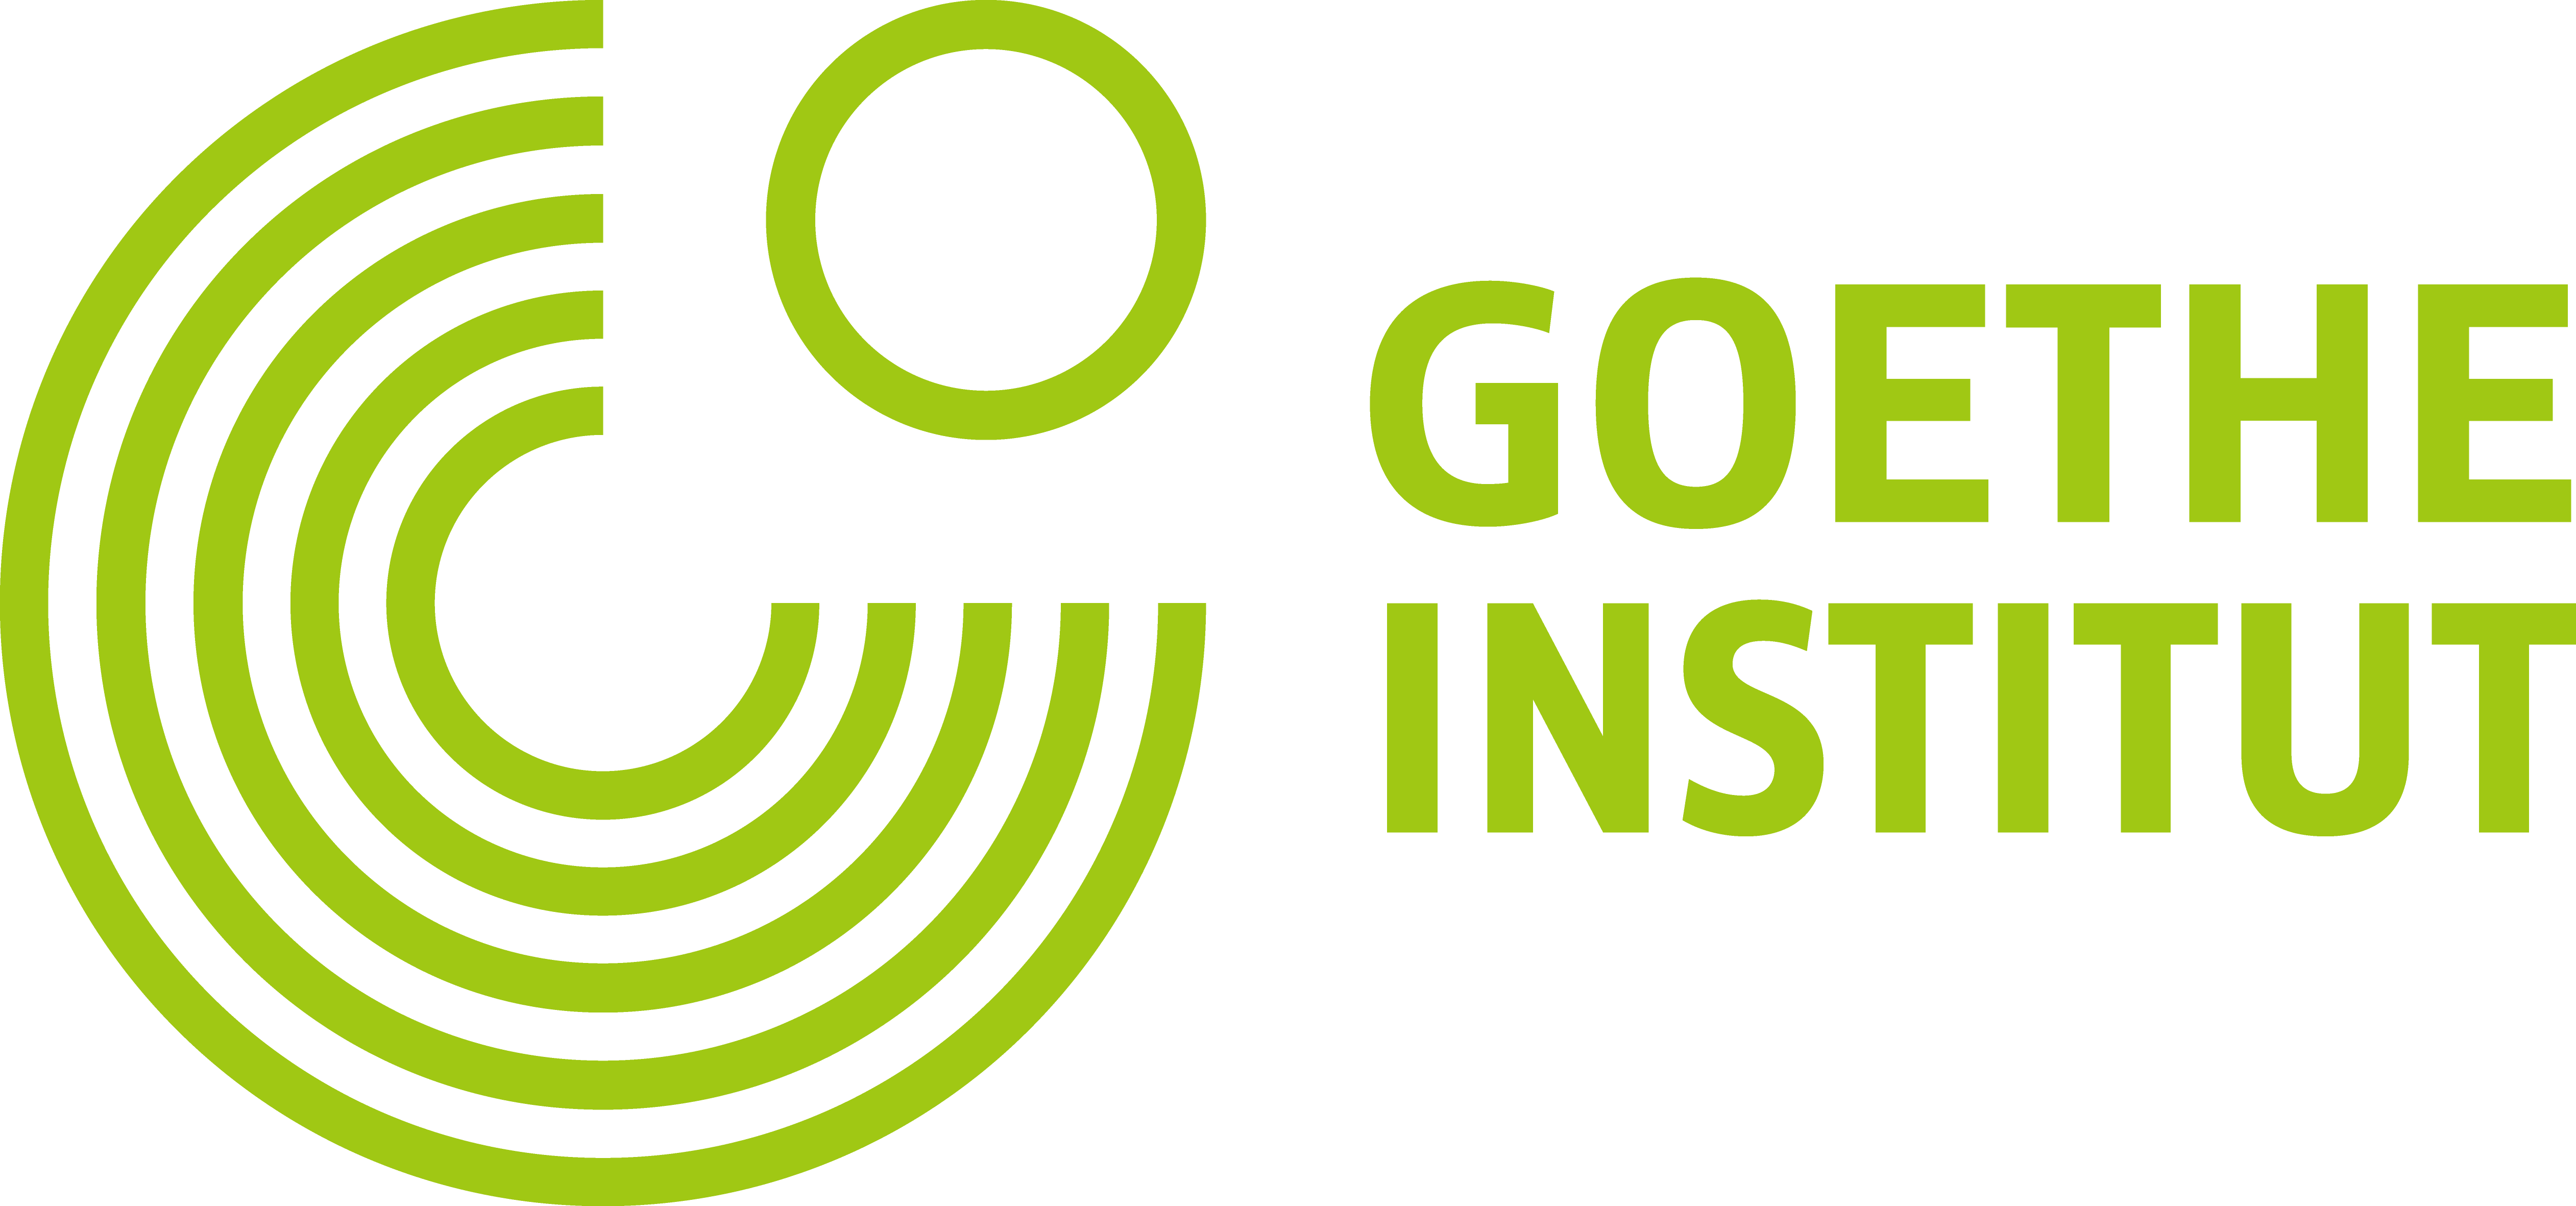 Goethe institute logo with green nested circles and the title GOETHE INSTITUTE -  goethe.de